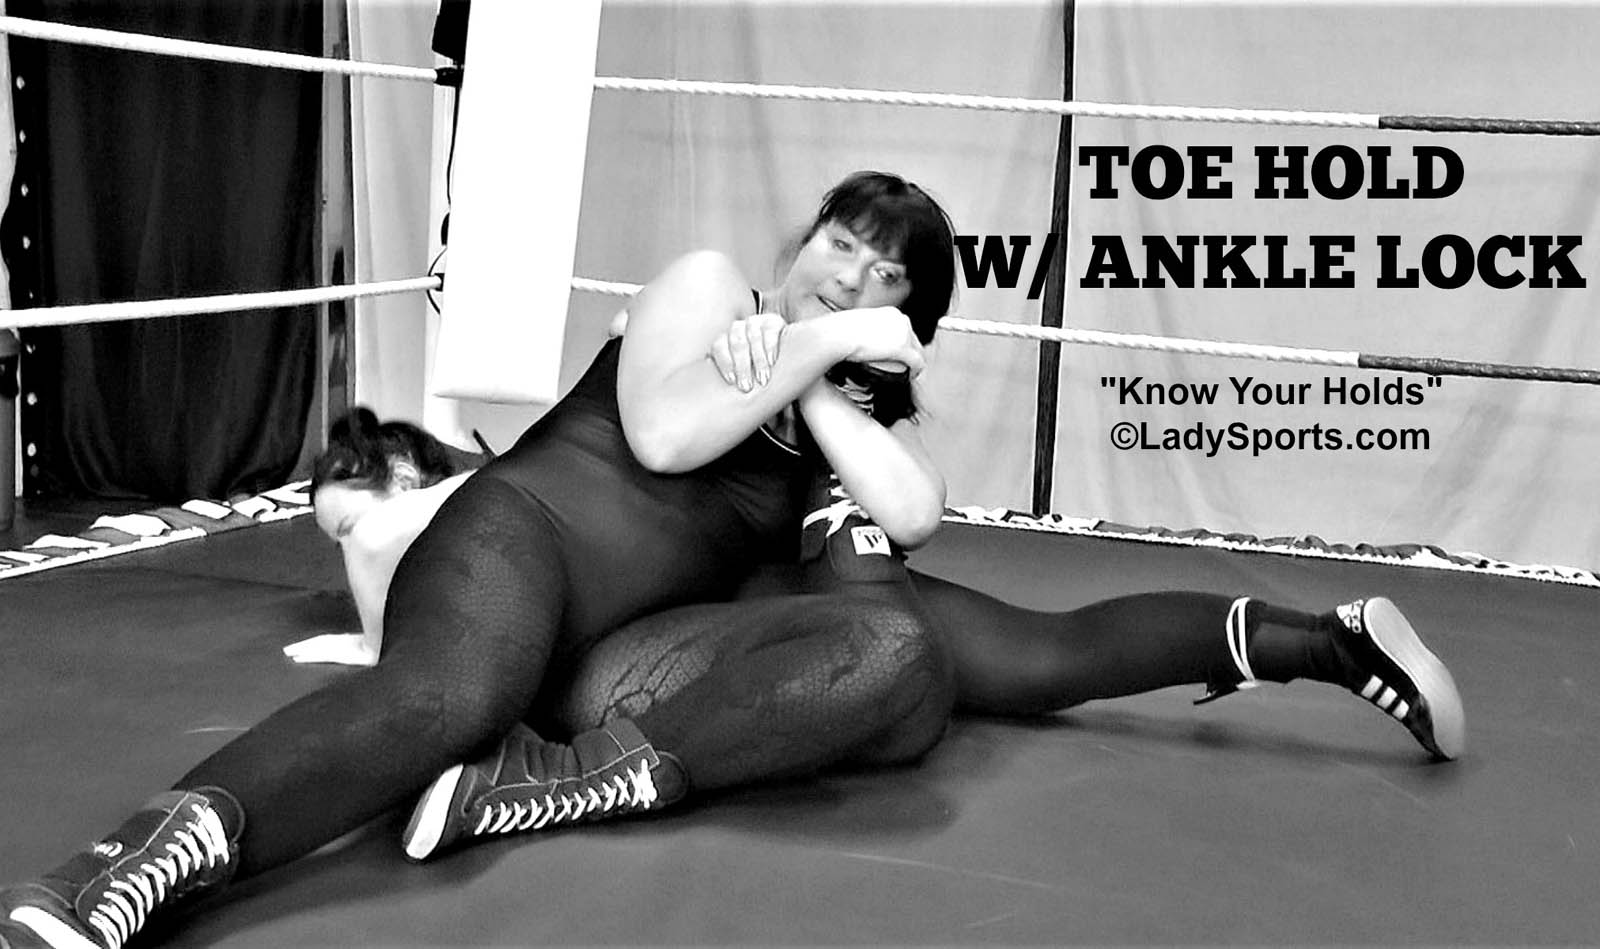 Toe Hold with Ankle Lock